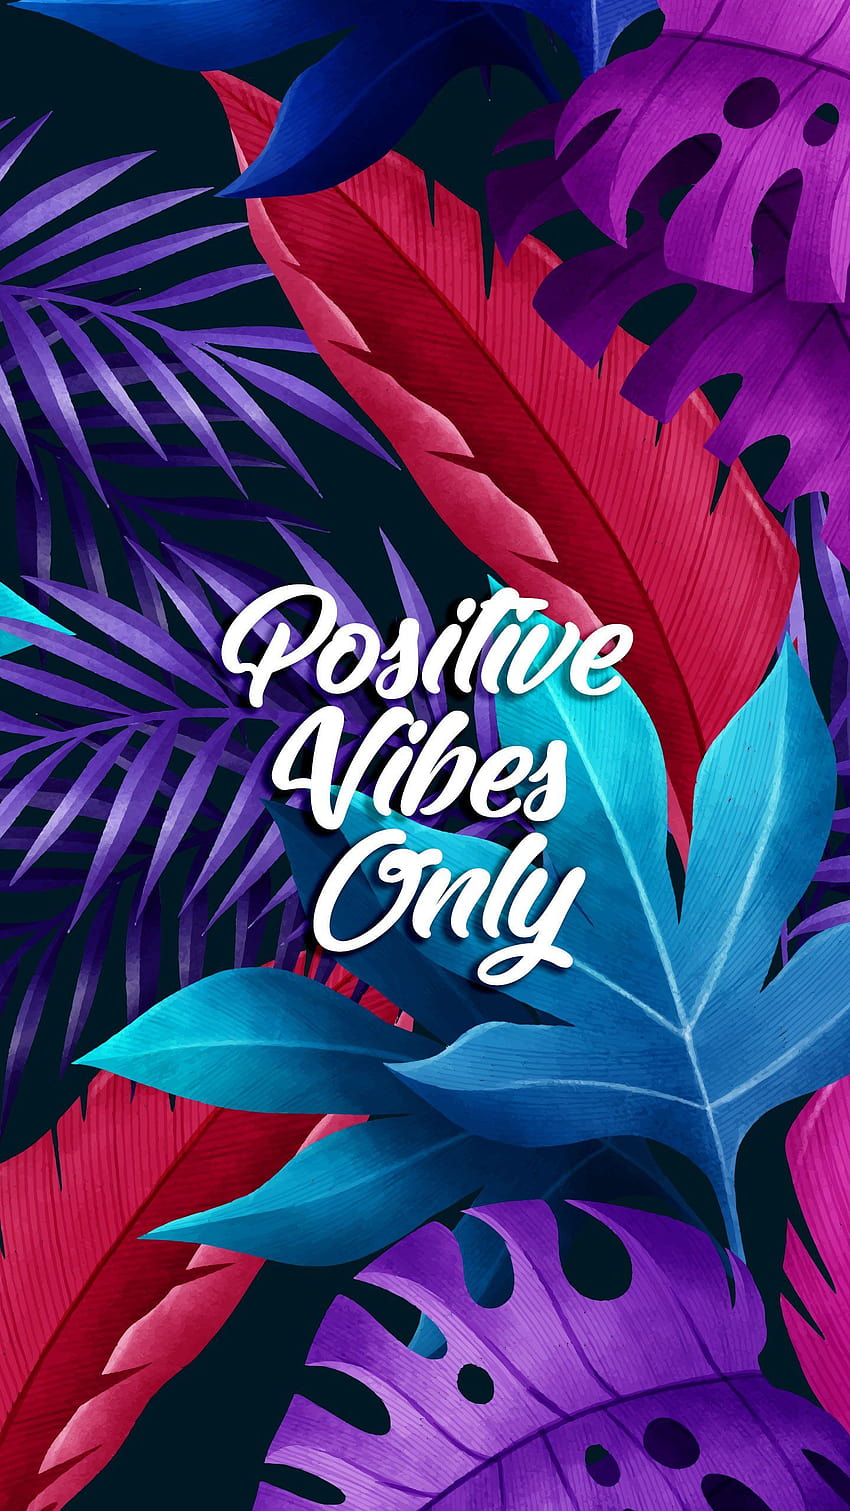 Positive Vibes Only Stock Photos and Images - 123RF